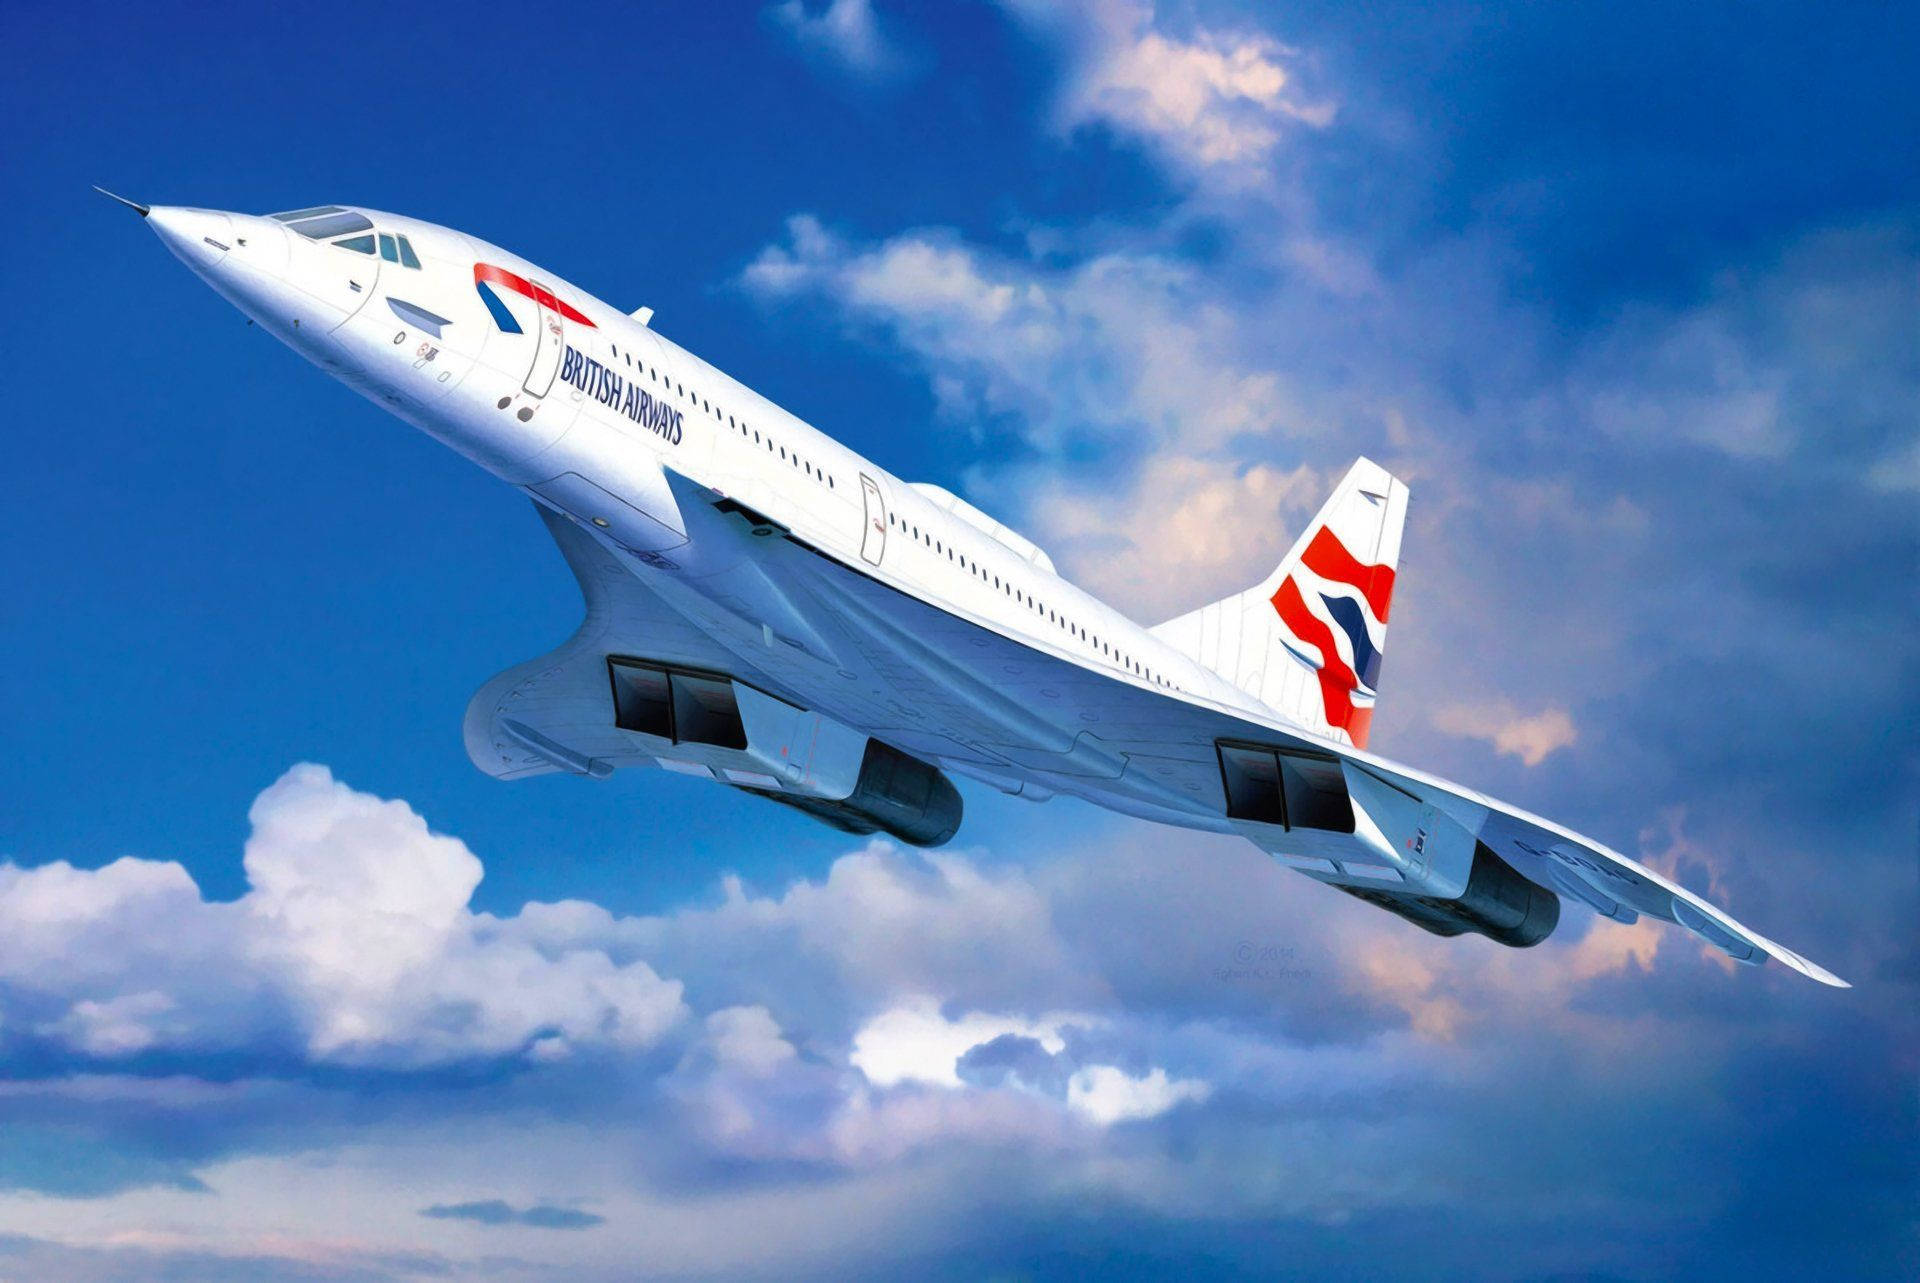 Flying Concorde Aircraft From British Airways Background